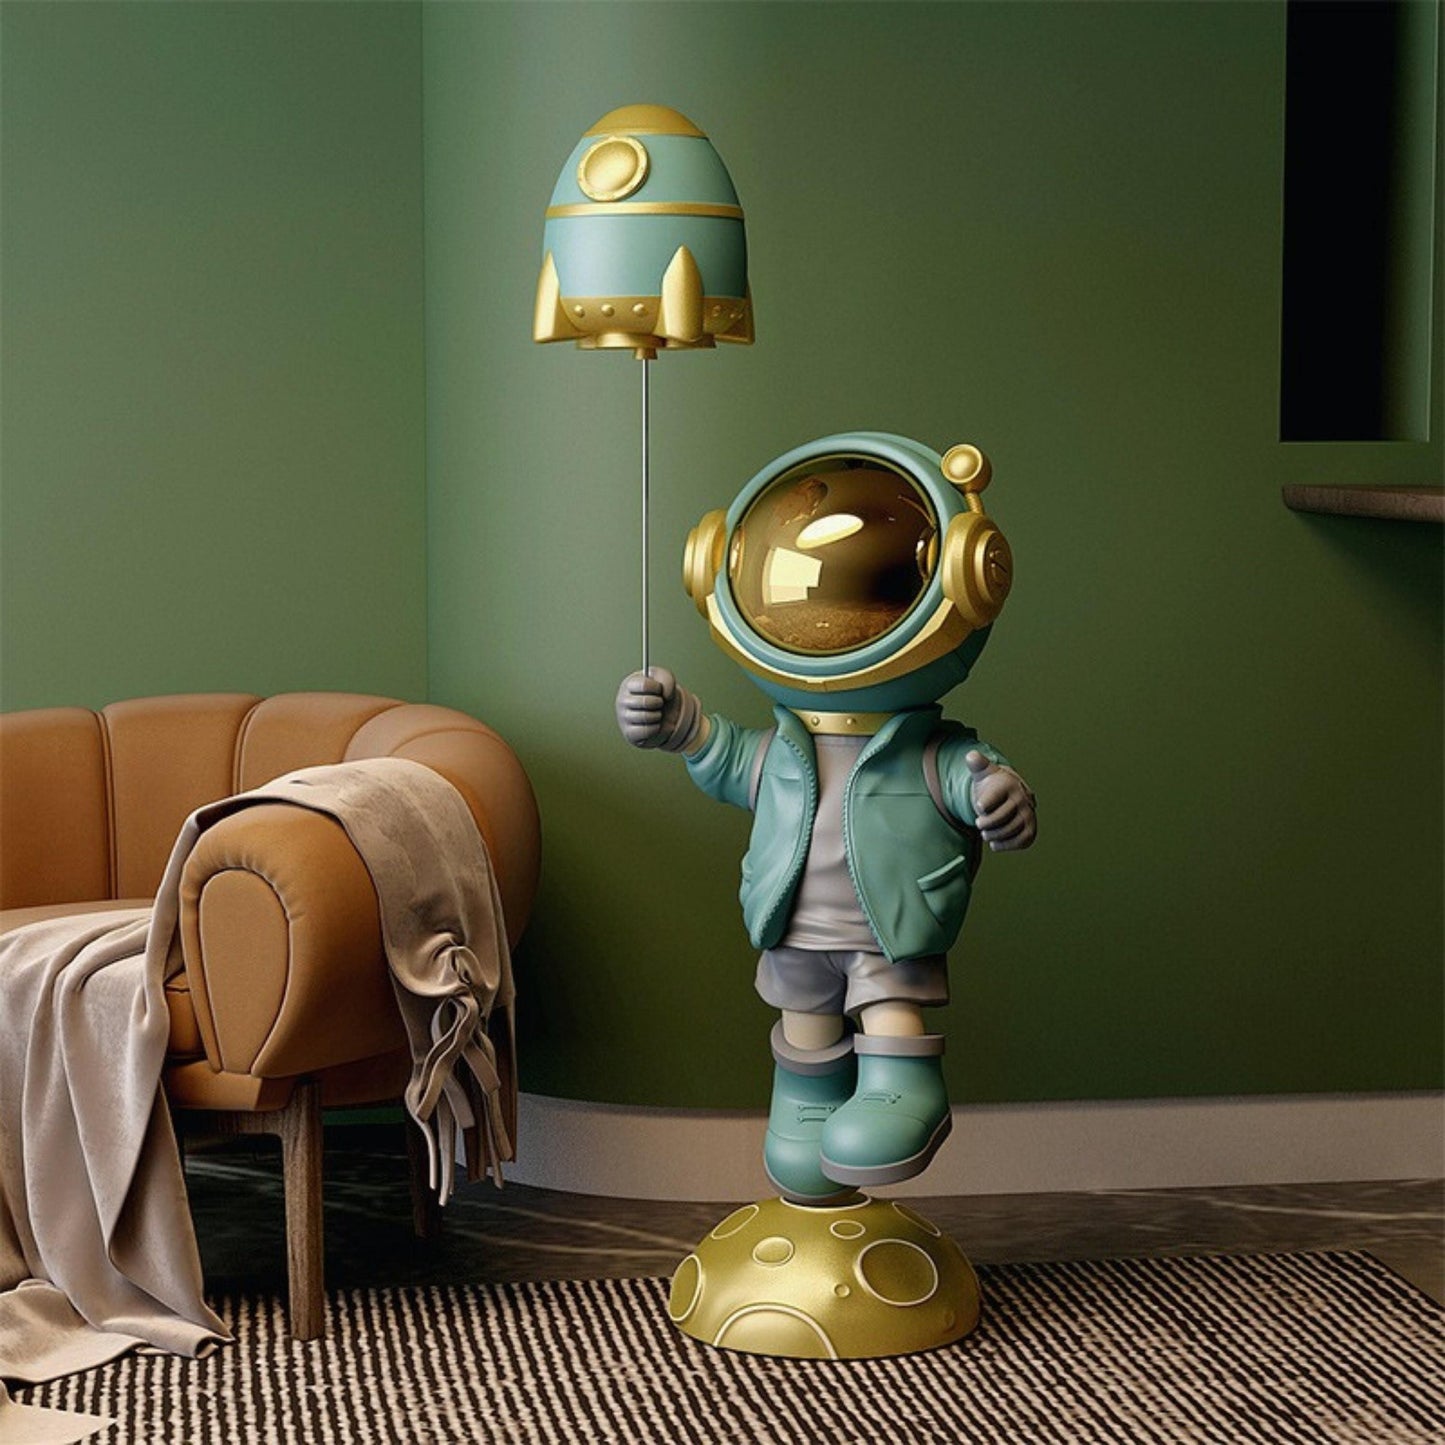 Astronaut Holding a Rocket Balloon Statue - Space Mesmerise - Space Gifts | Lamps | Statues | Home Decor